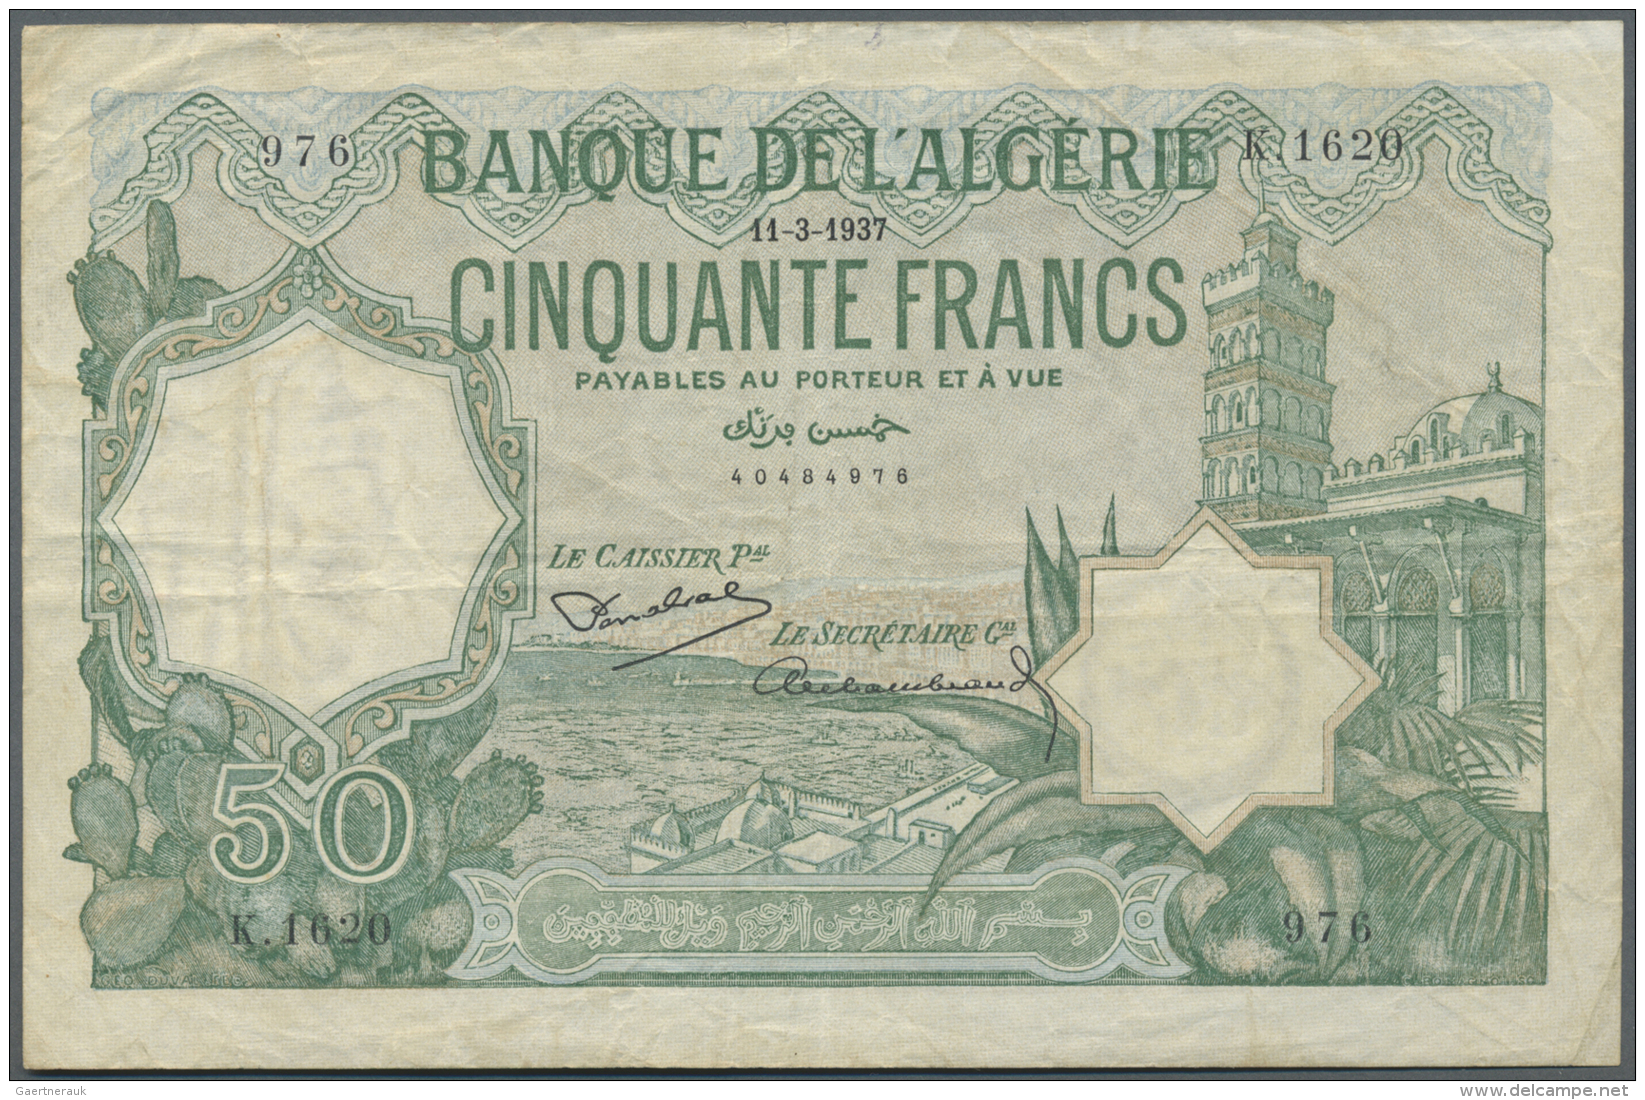 Algeria / Algerien: 50 France 1937 P. 80a, Used With Folds And Creases, Minor Border Tears, No Holes, Still Crispness In - Algérie